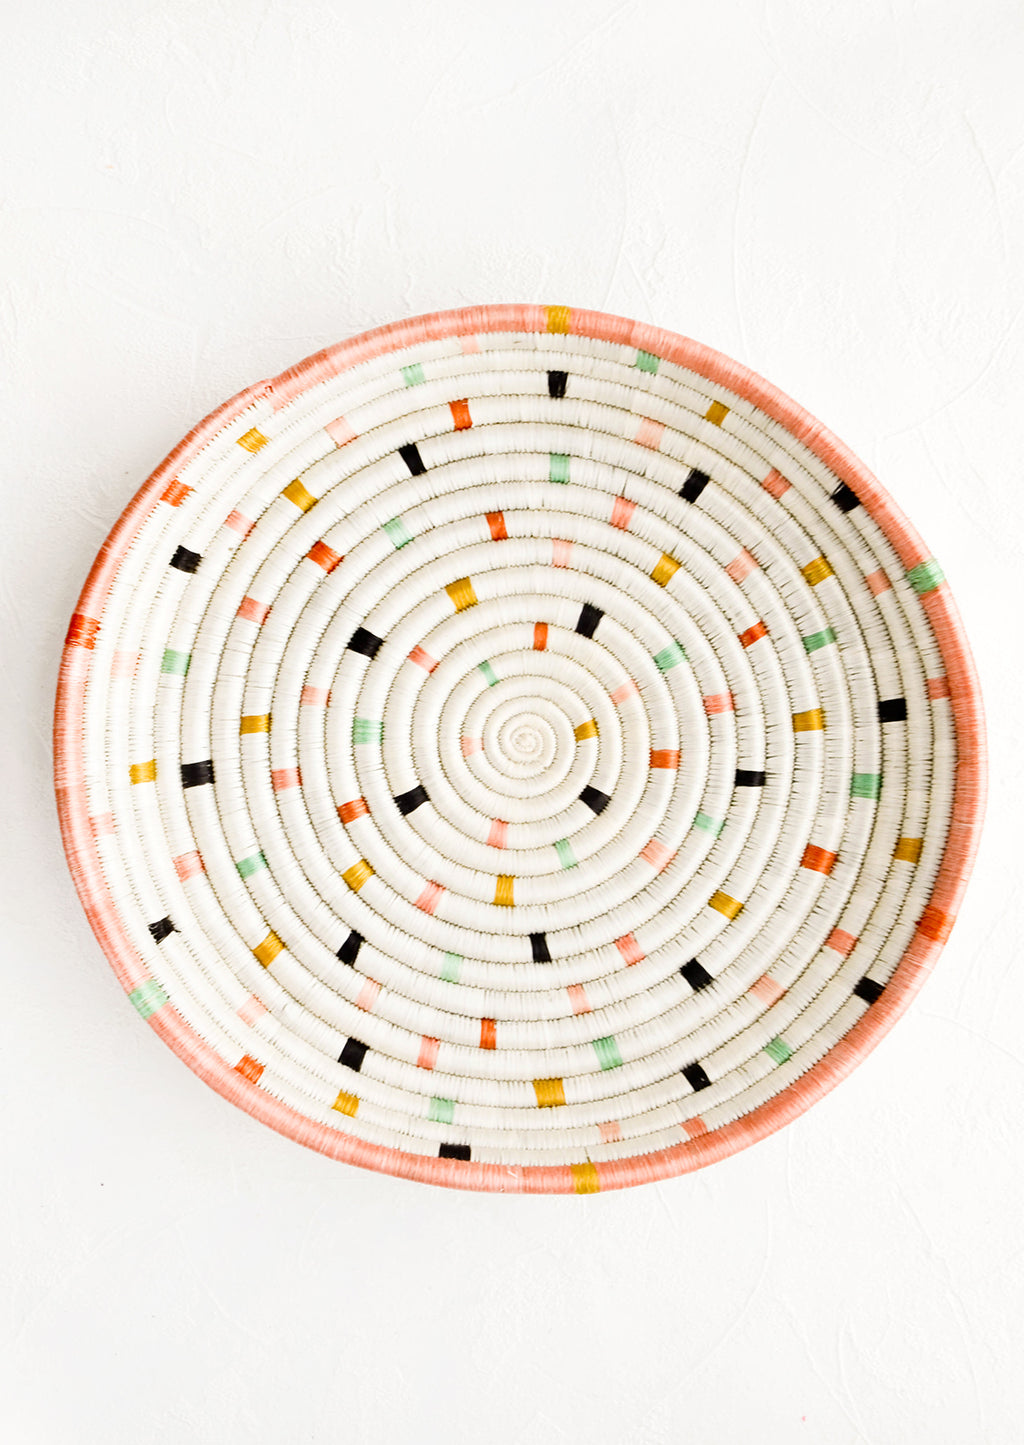 3: Round, shallow serving tray made from woven sweetgrass. Ivory with pastel colored dashes and peach rim.